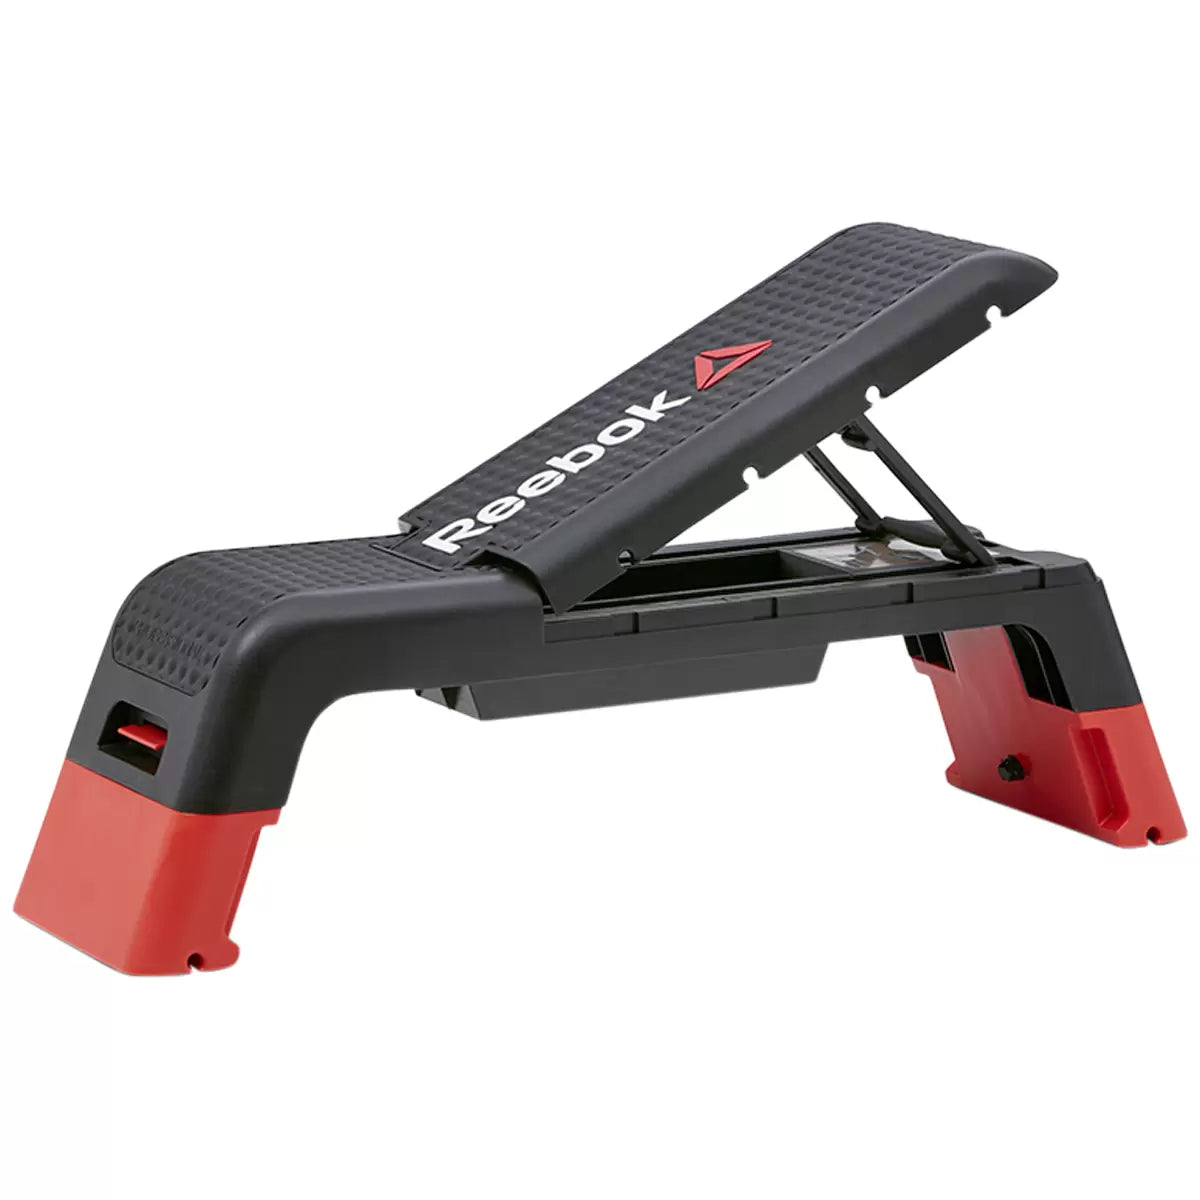 Reebok Adjustable Bench & Step - Strength & Core Training at Home Equipment - evryfit - accessories, aerobic step, bench, deck, fitness deck, step